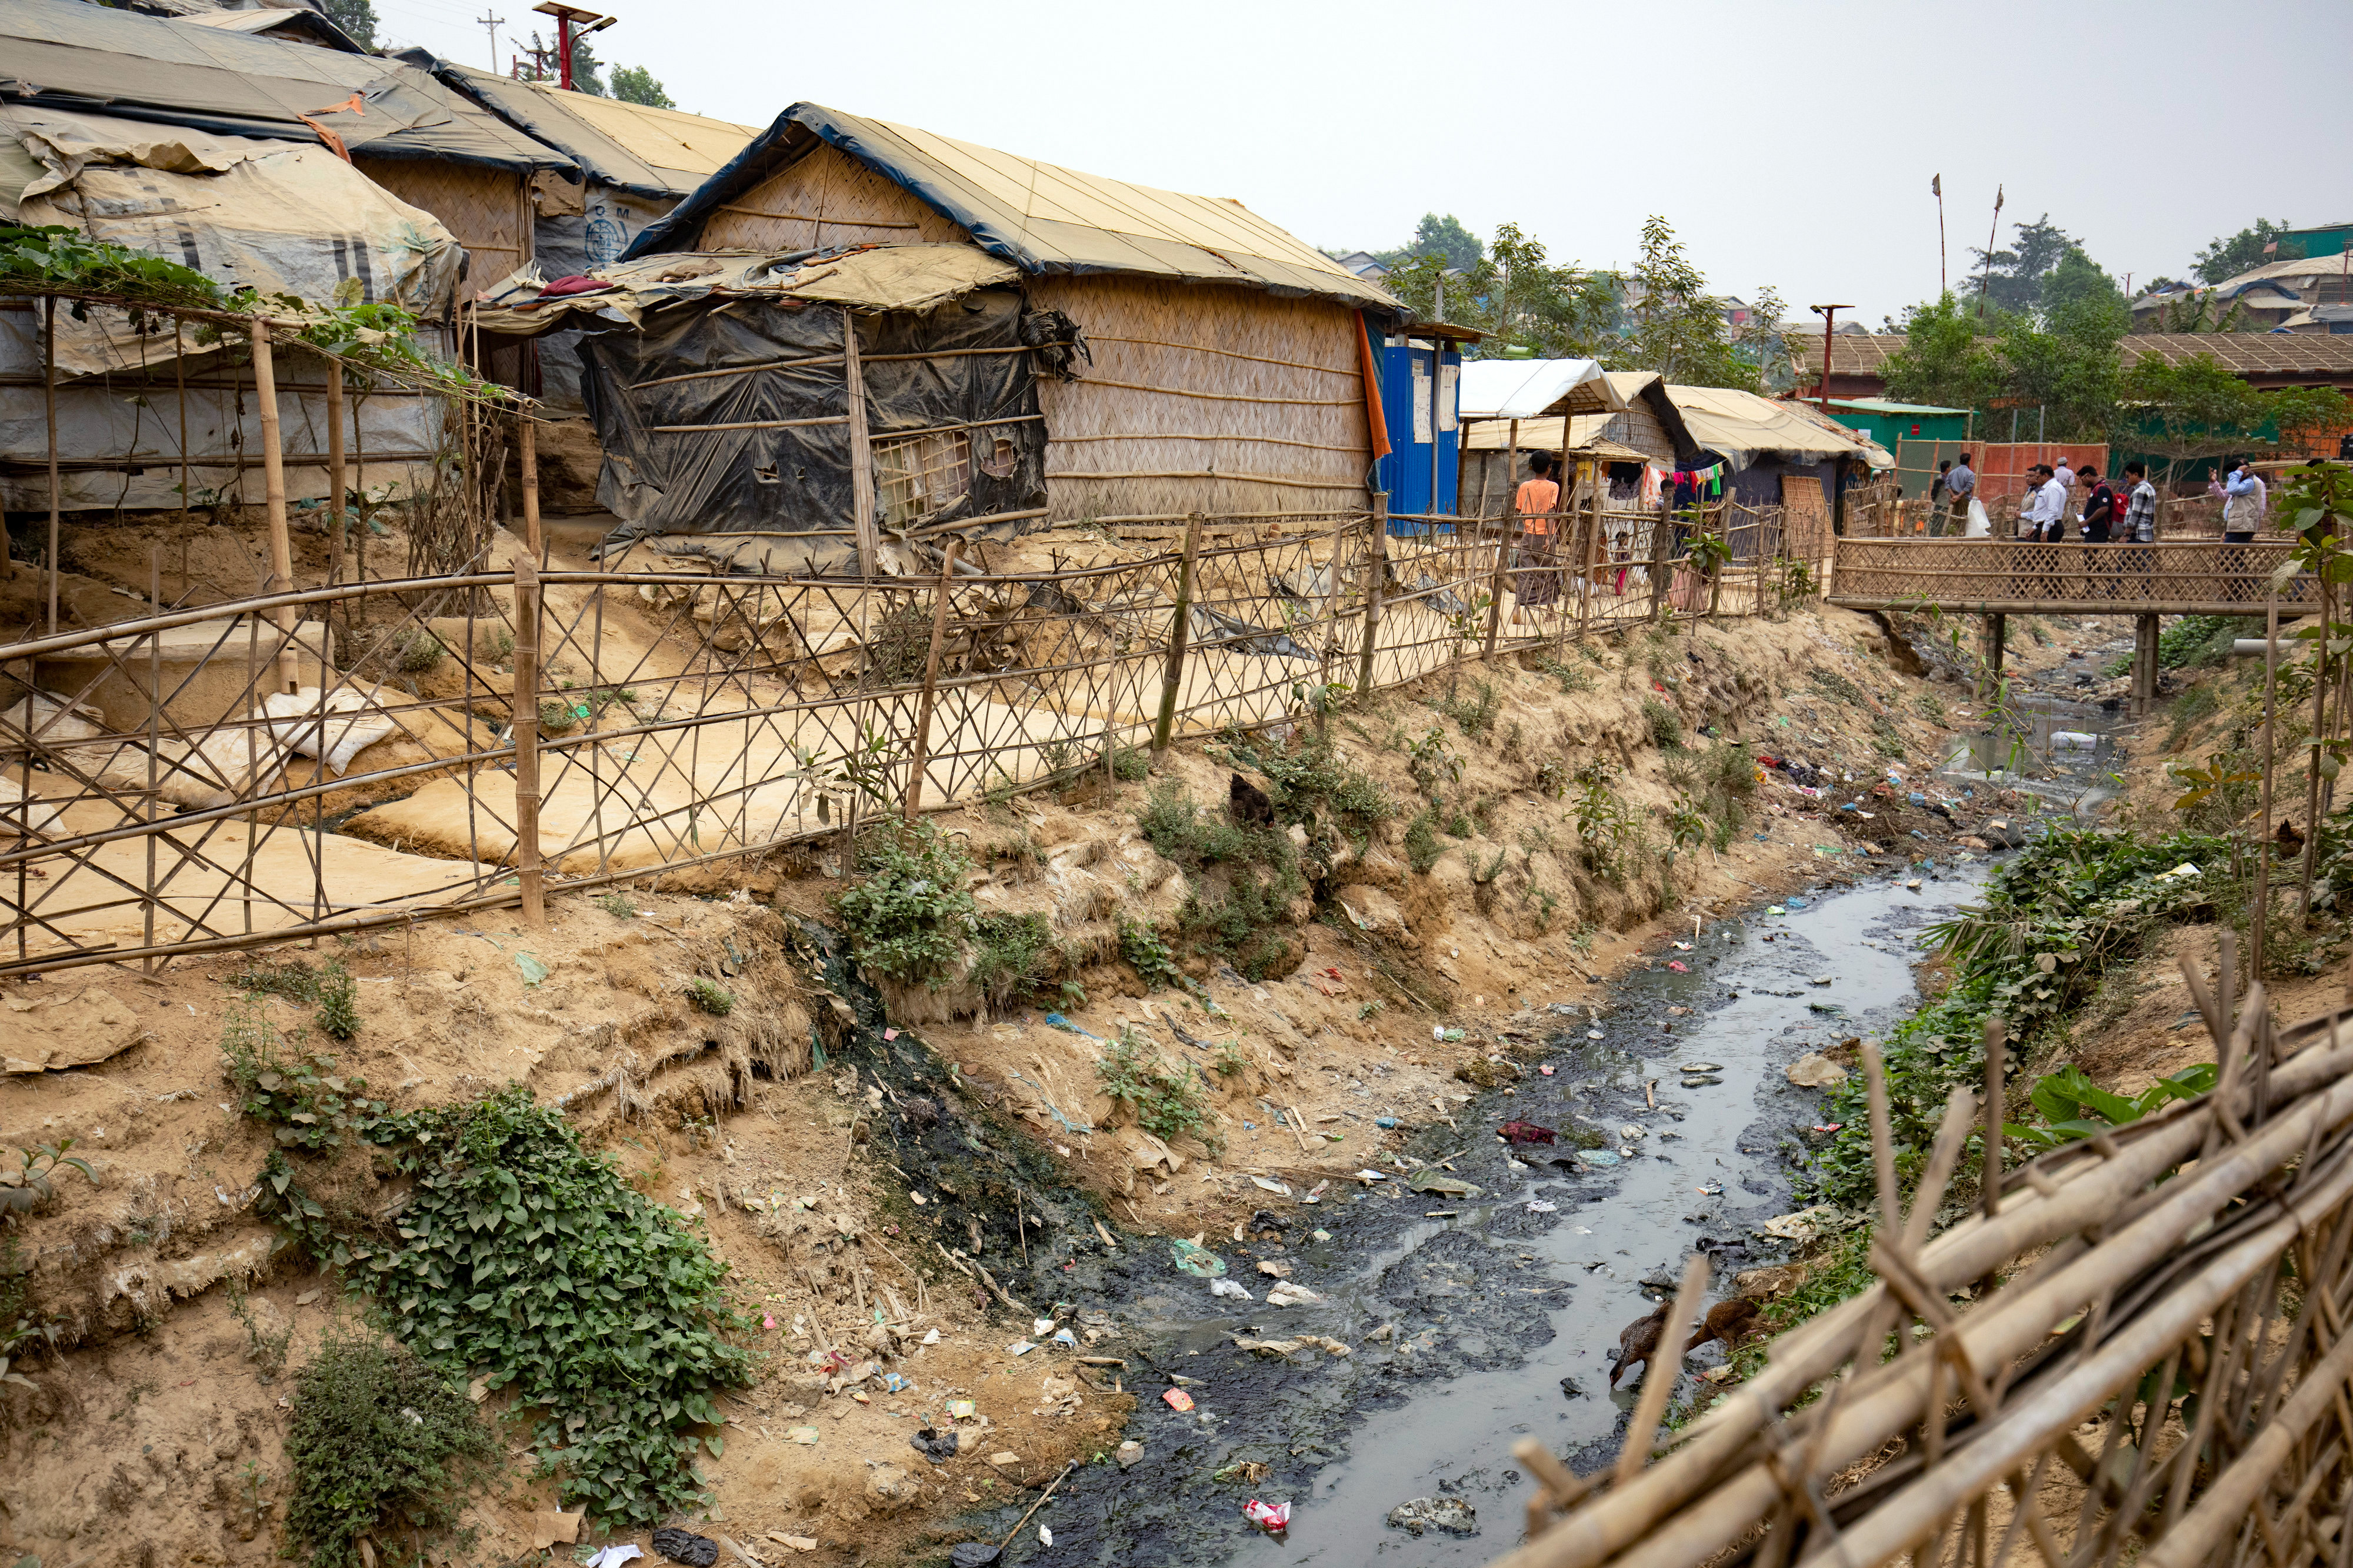 View of a ditch in the Kutupalong refugee camp, Cox Bazar in Bangladesh